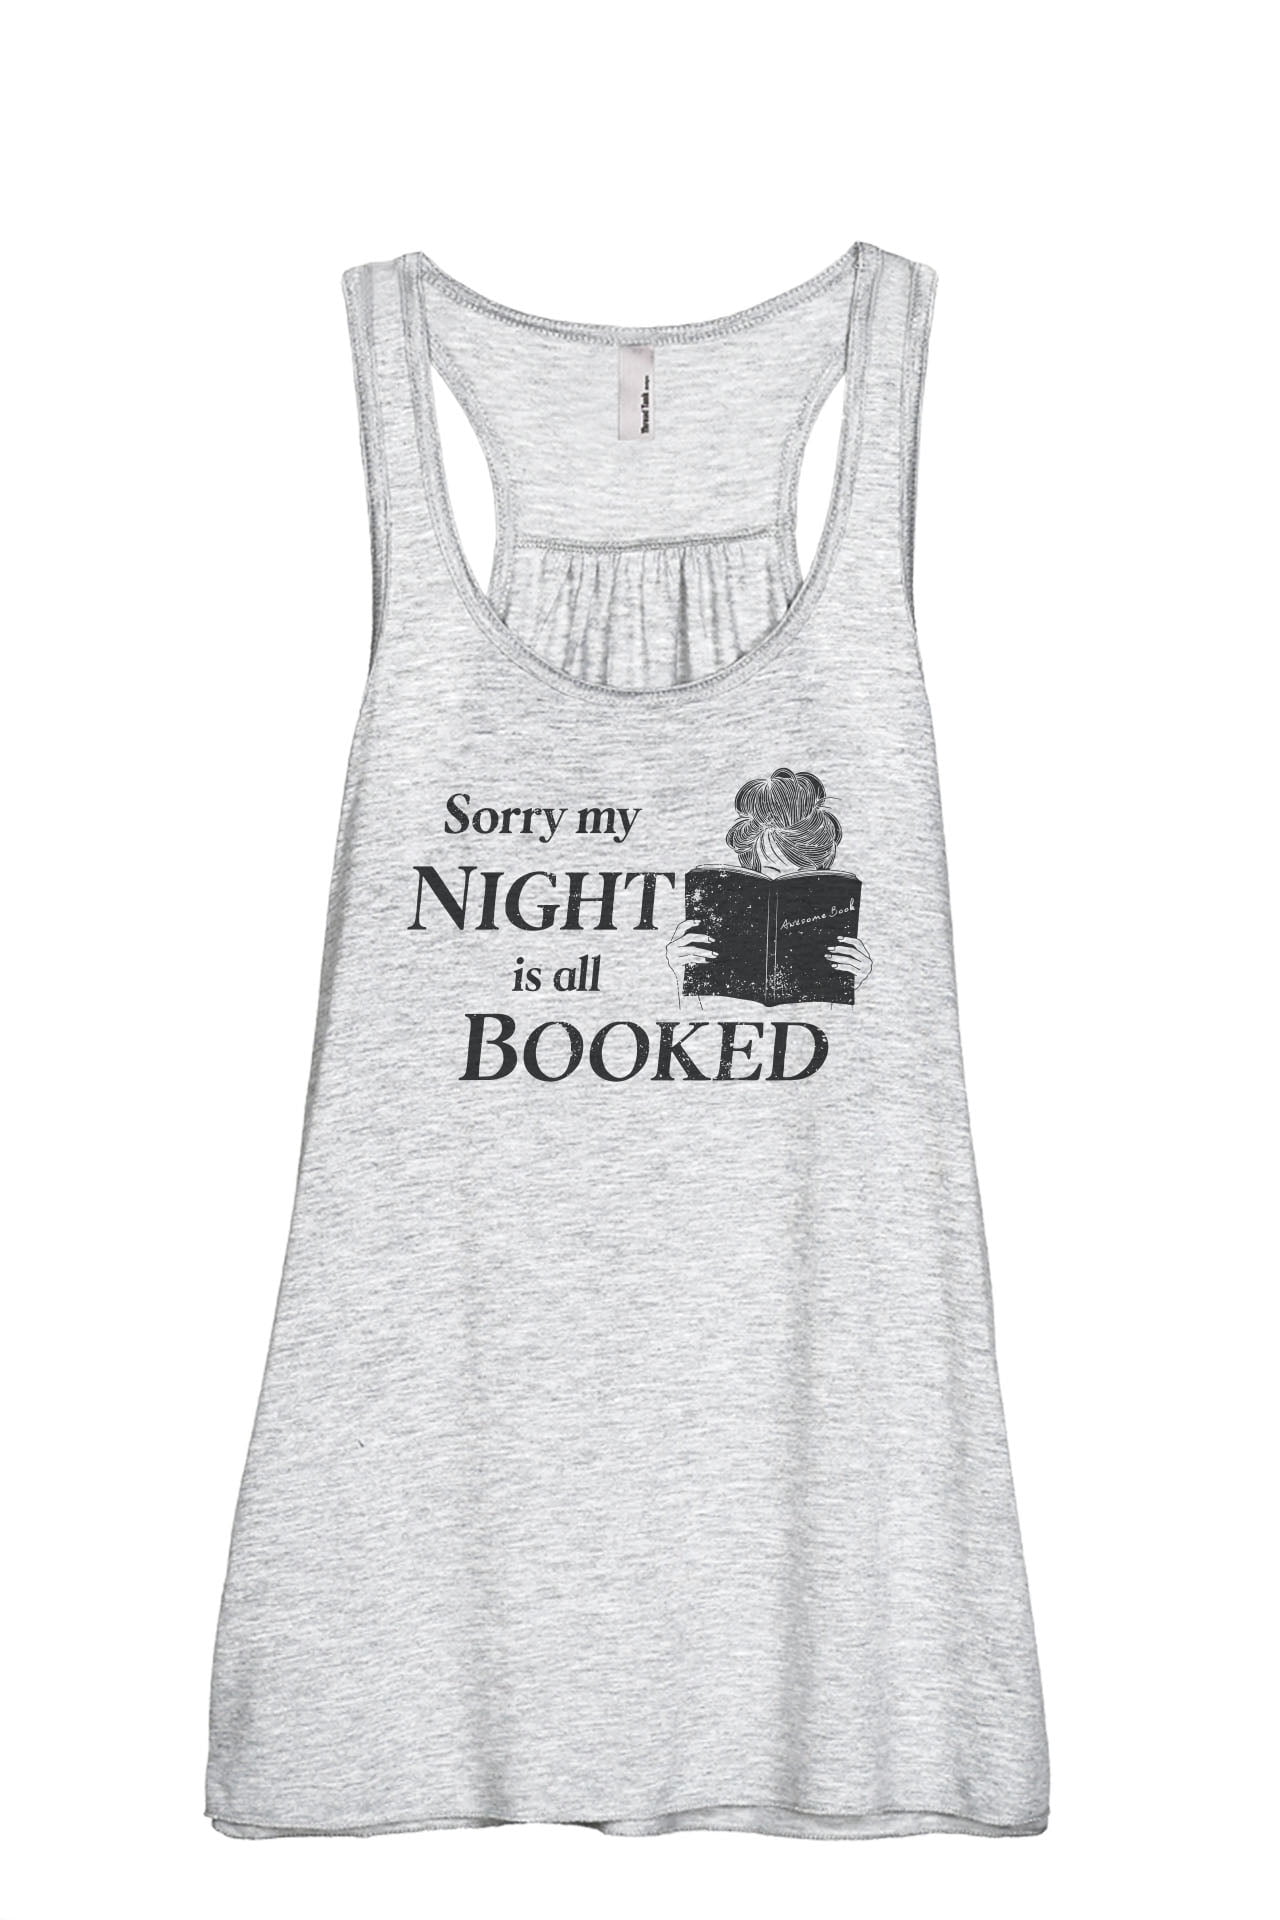 Sorry my evening is all booked Ladies T-shirt/Tank Top bb822f